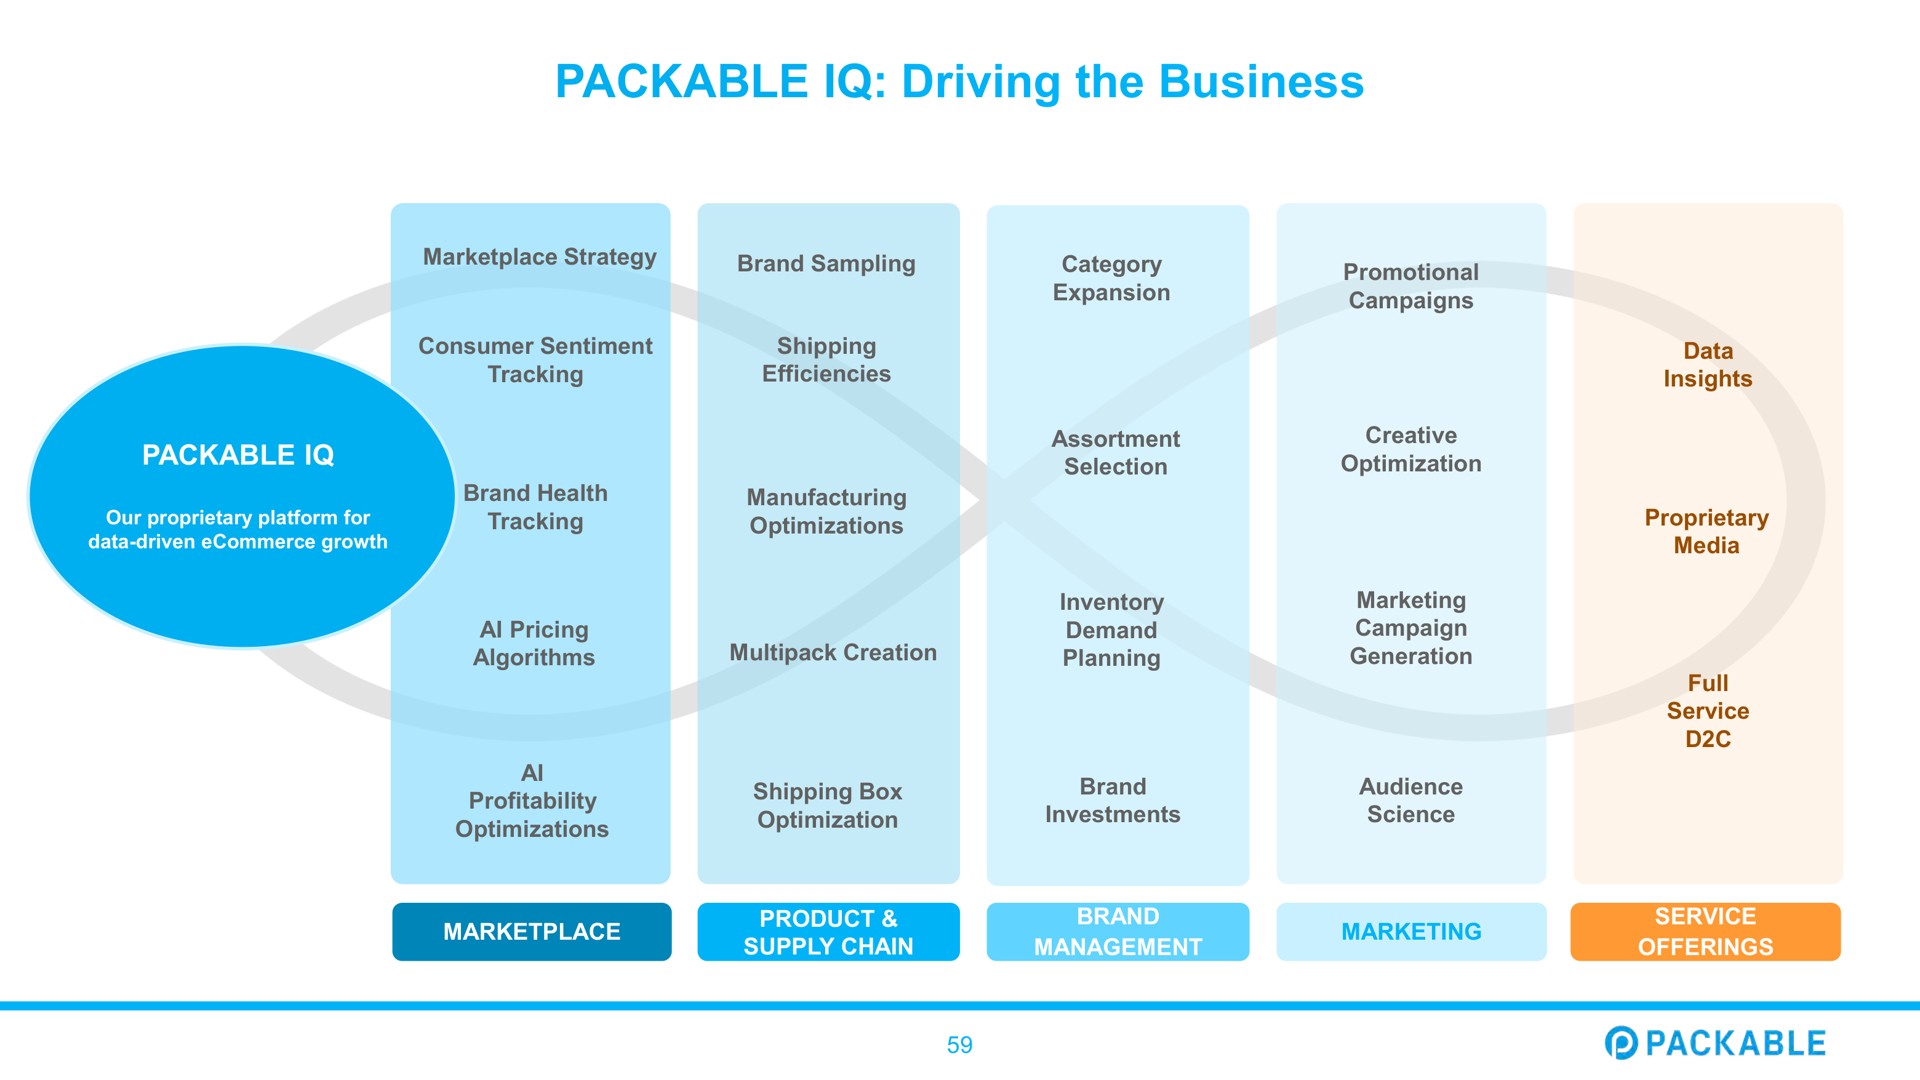 packable driving the business | Packable